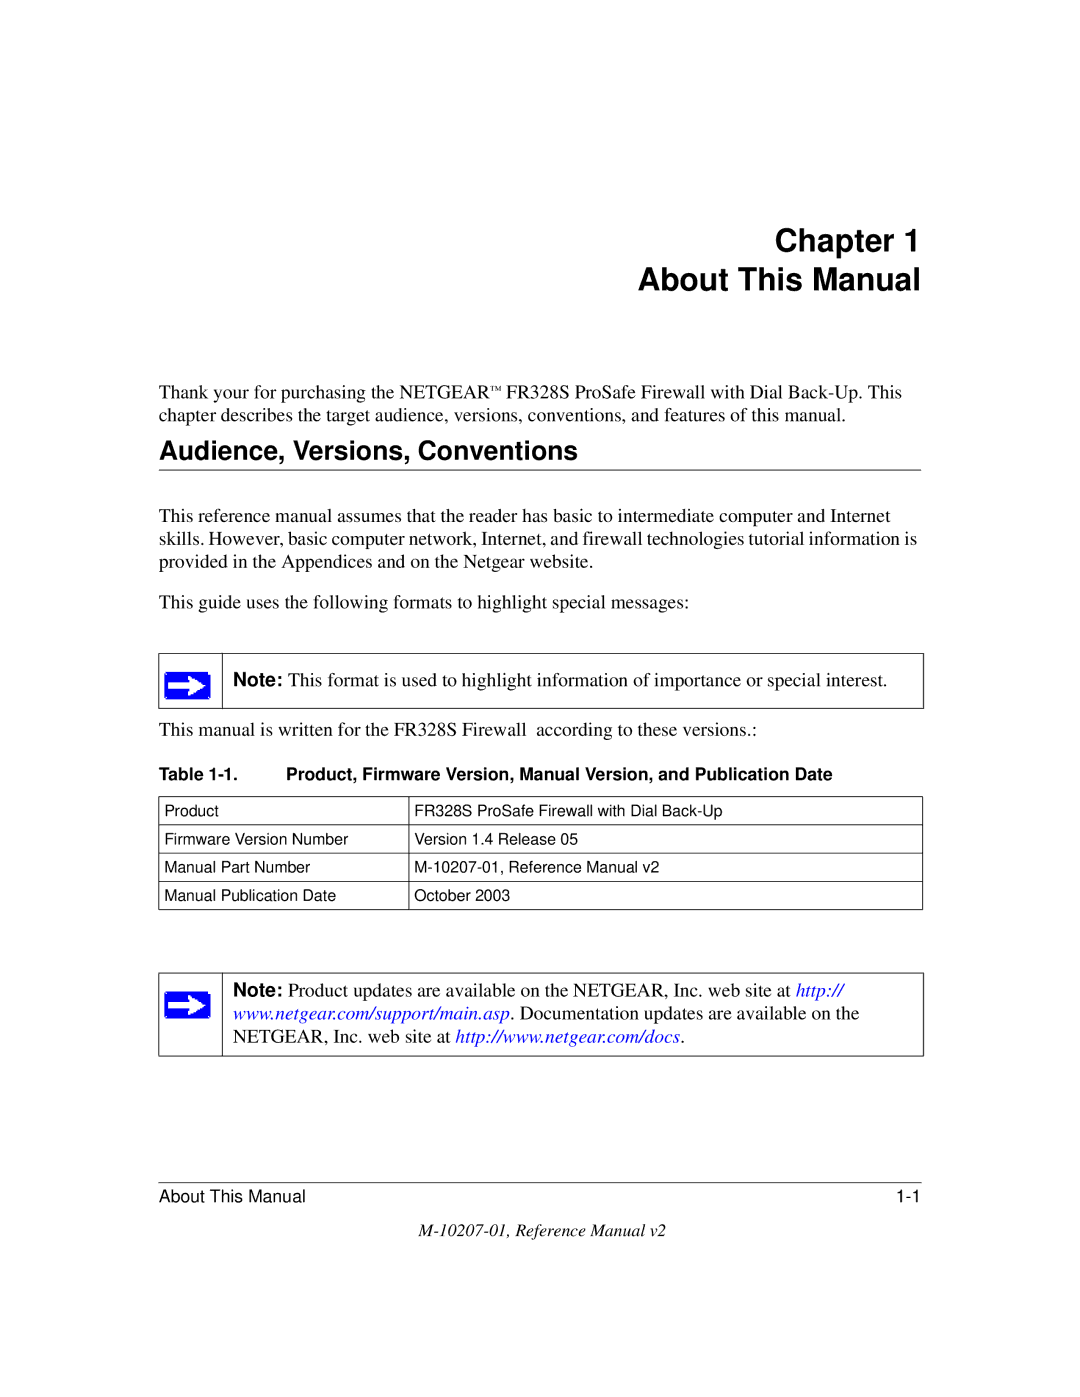 NETGEAR FR328S manual Chapter About This Manual, Audience, Versions, Conventions 